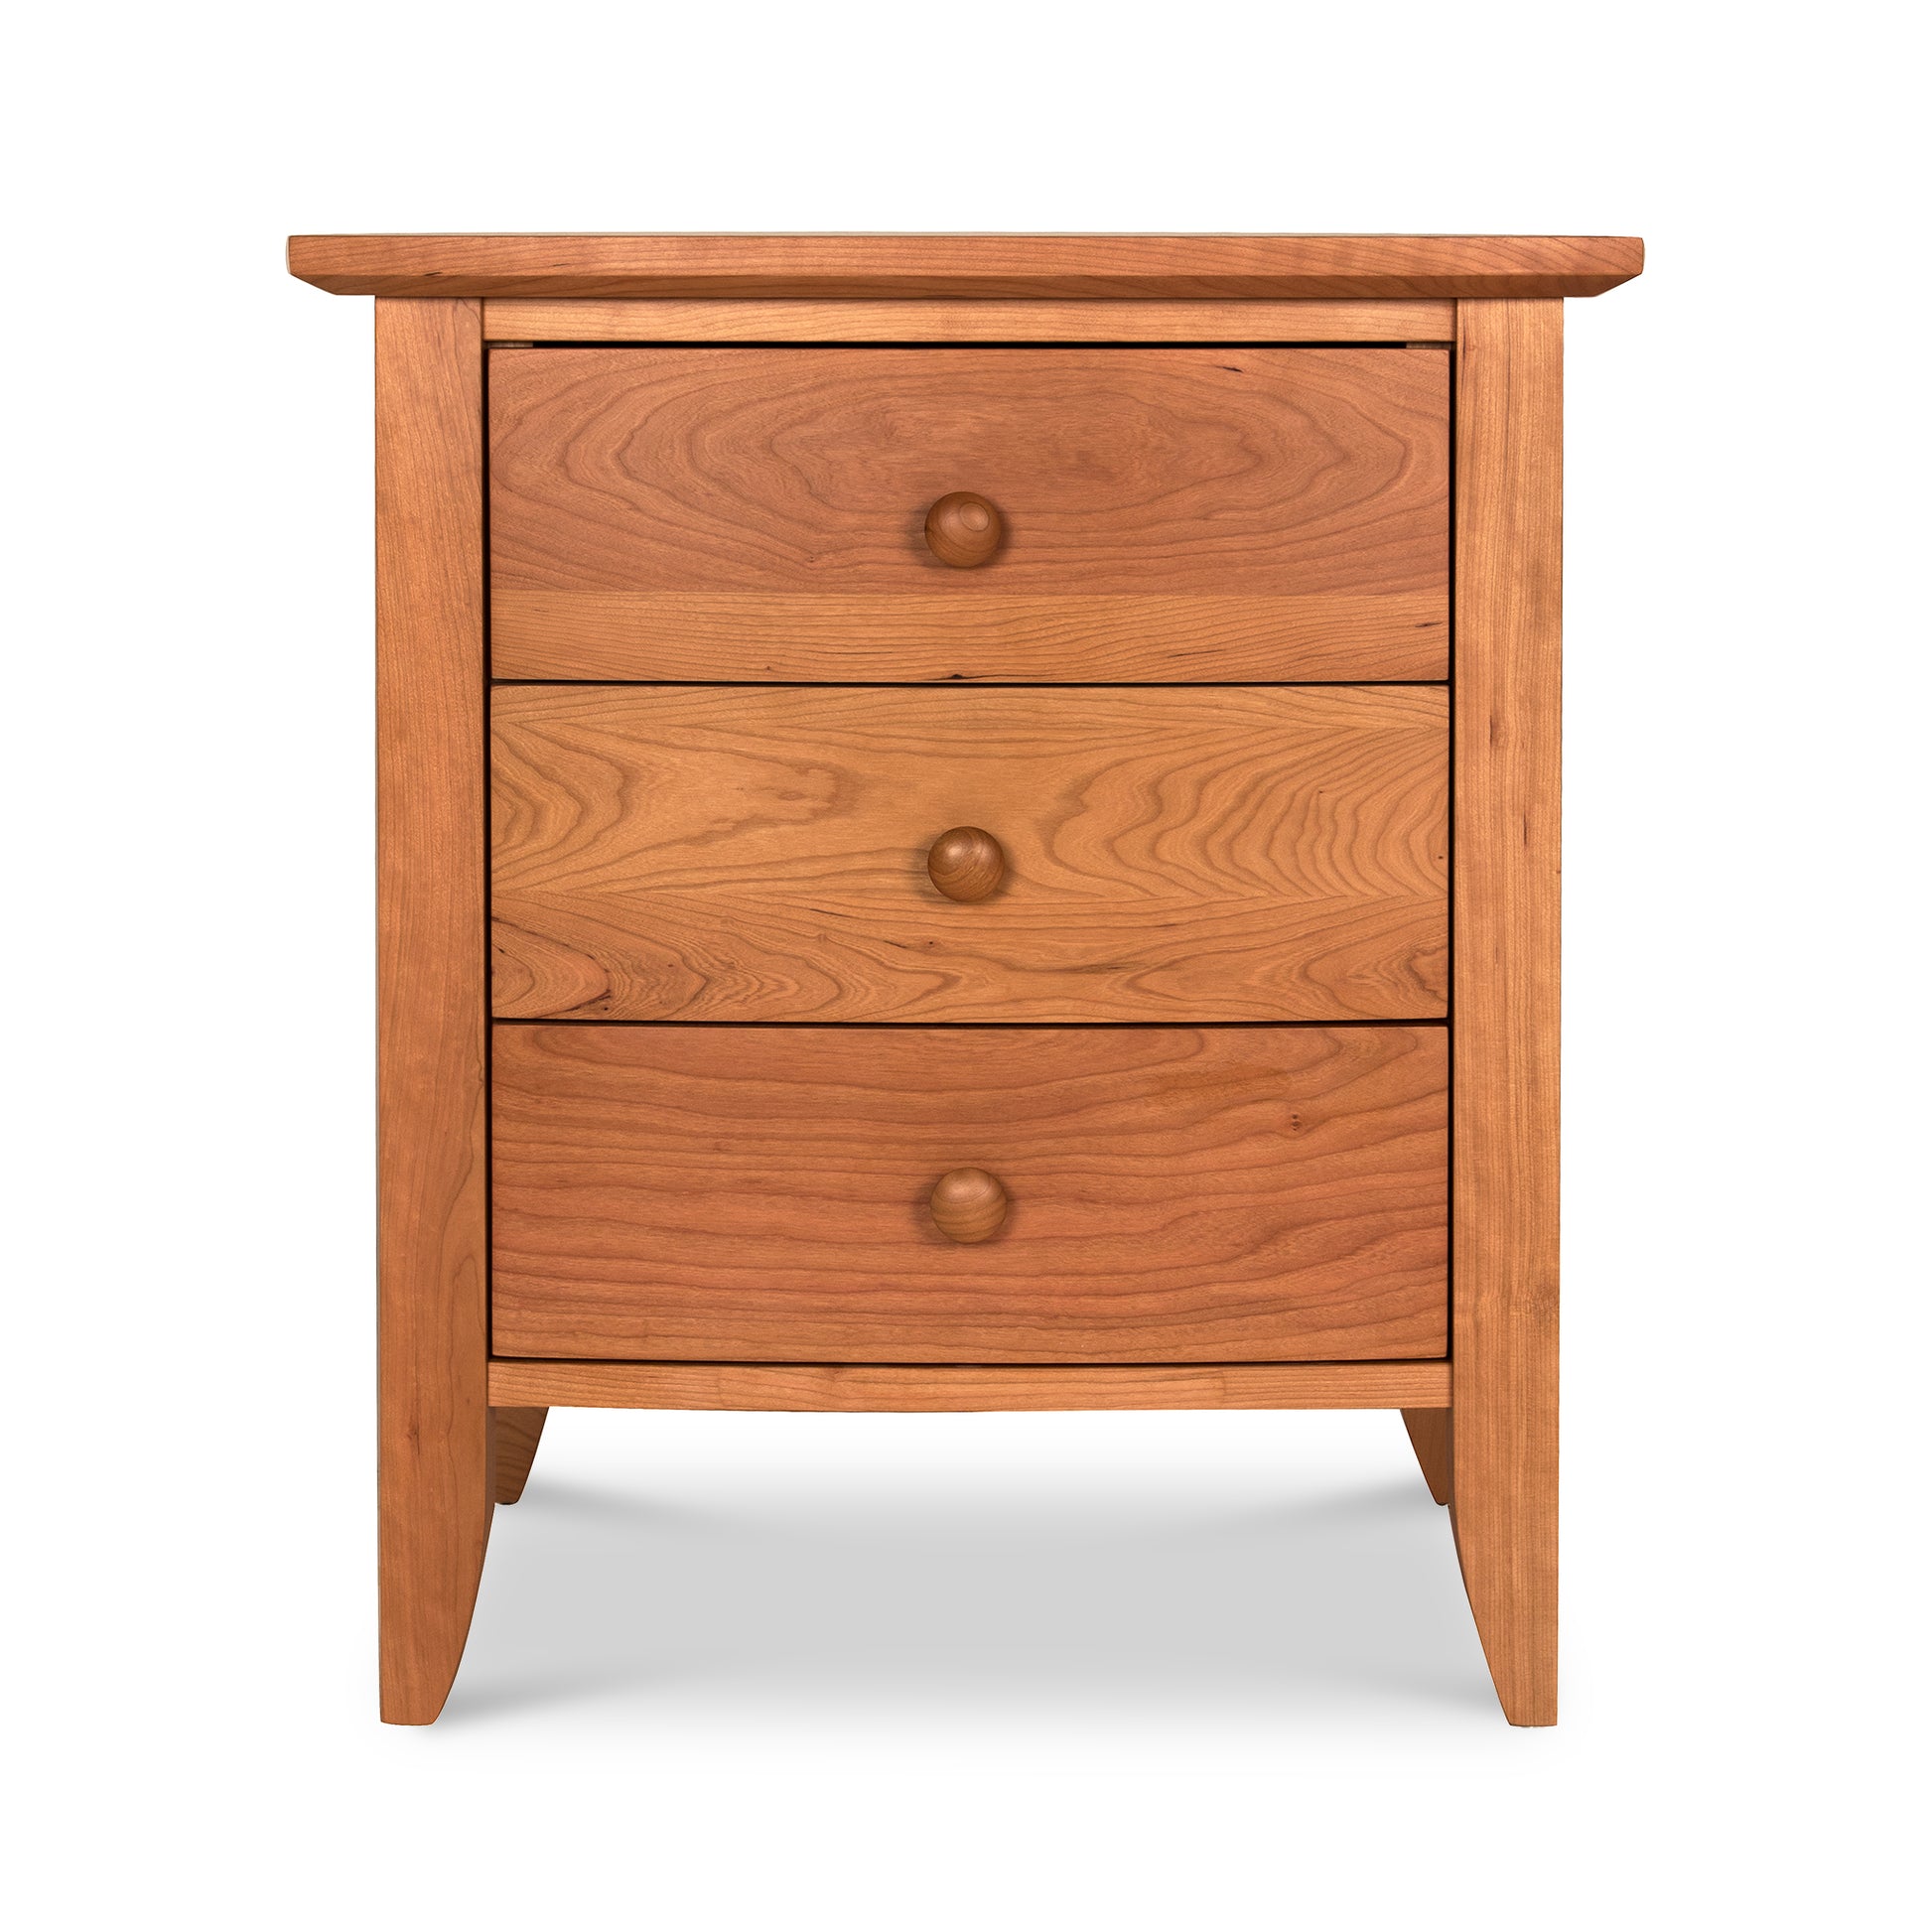 A Bow Front 3-Drawer Nightstand by Lyndon Furniture, with three drawers.